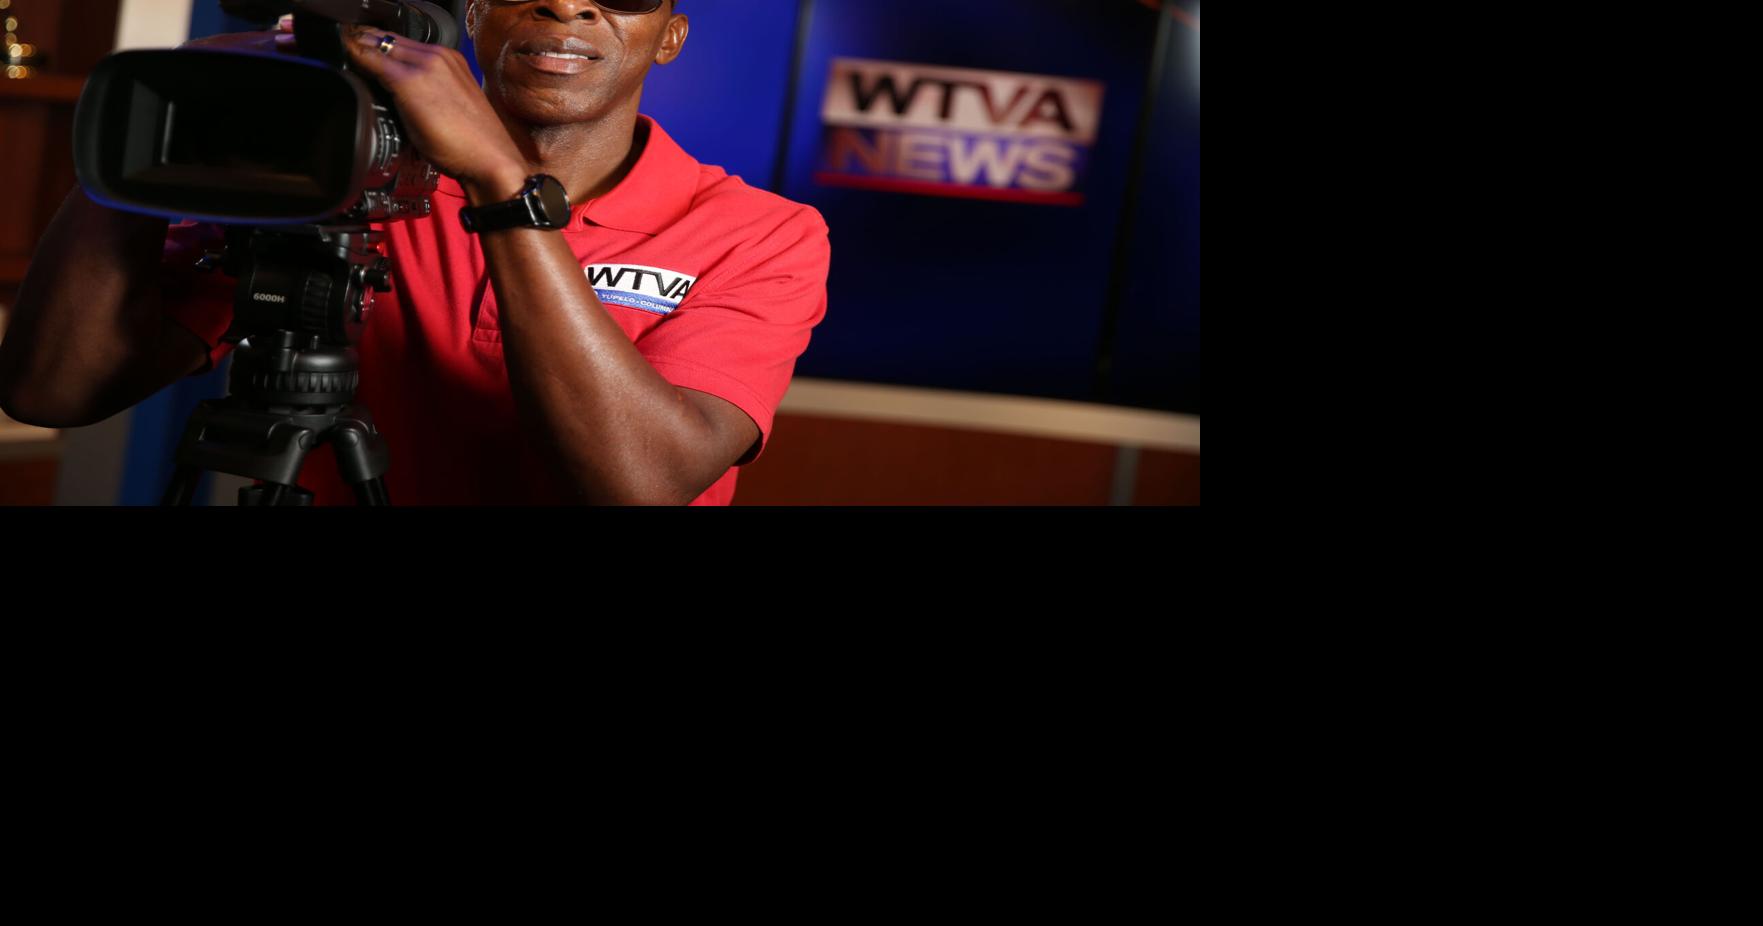 WTVA’s chief videographer has covered Northeast Mississippi for more than two decades